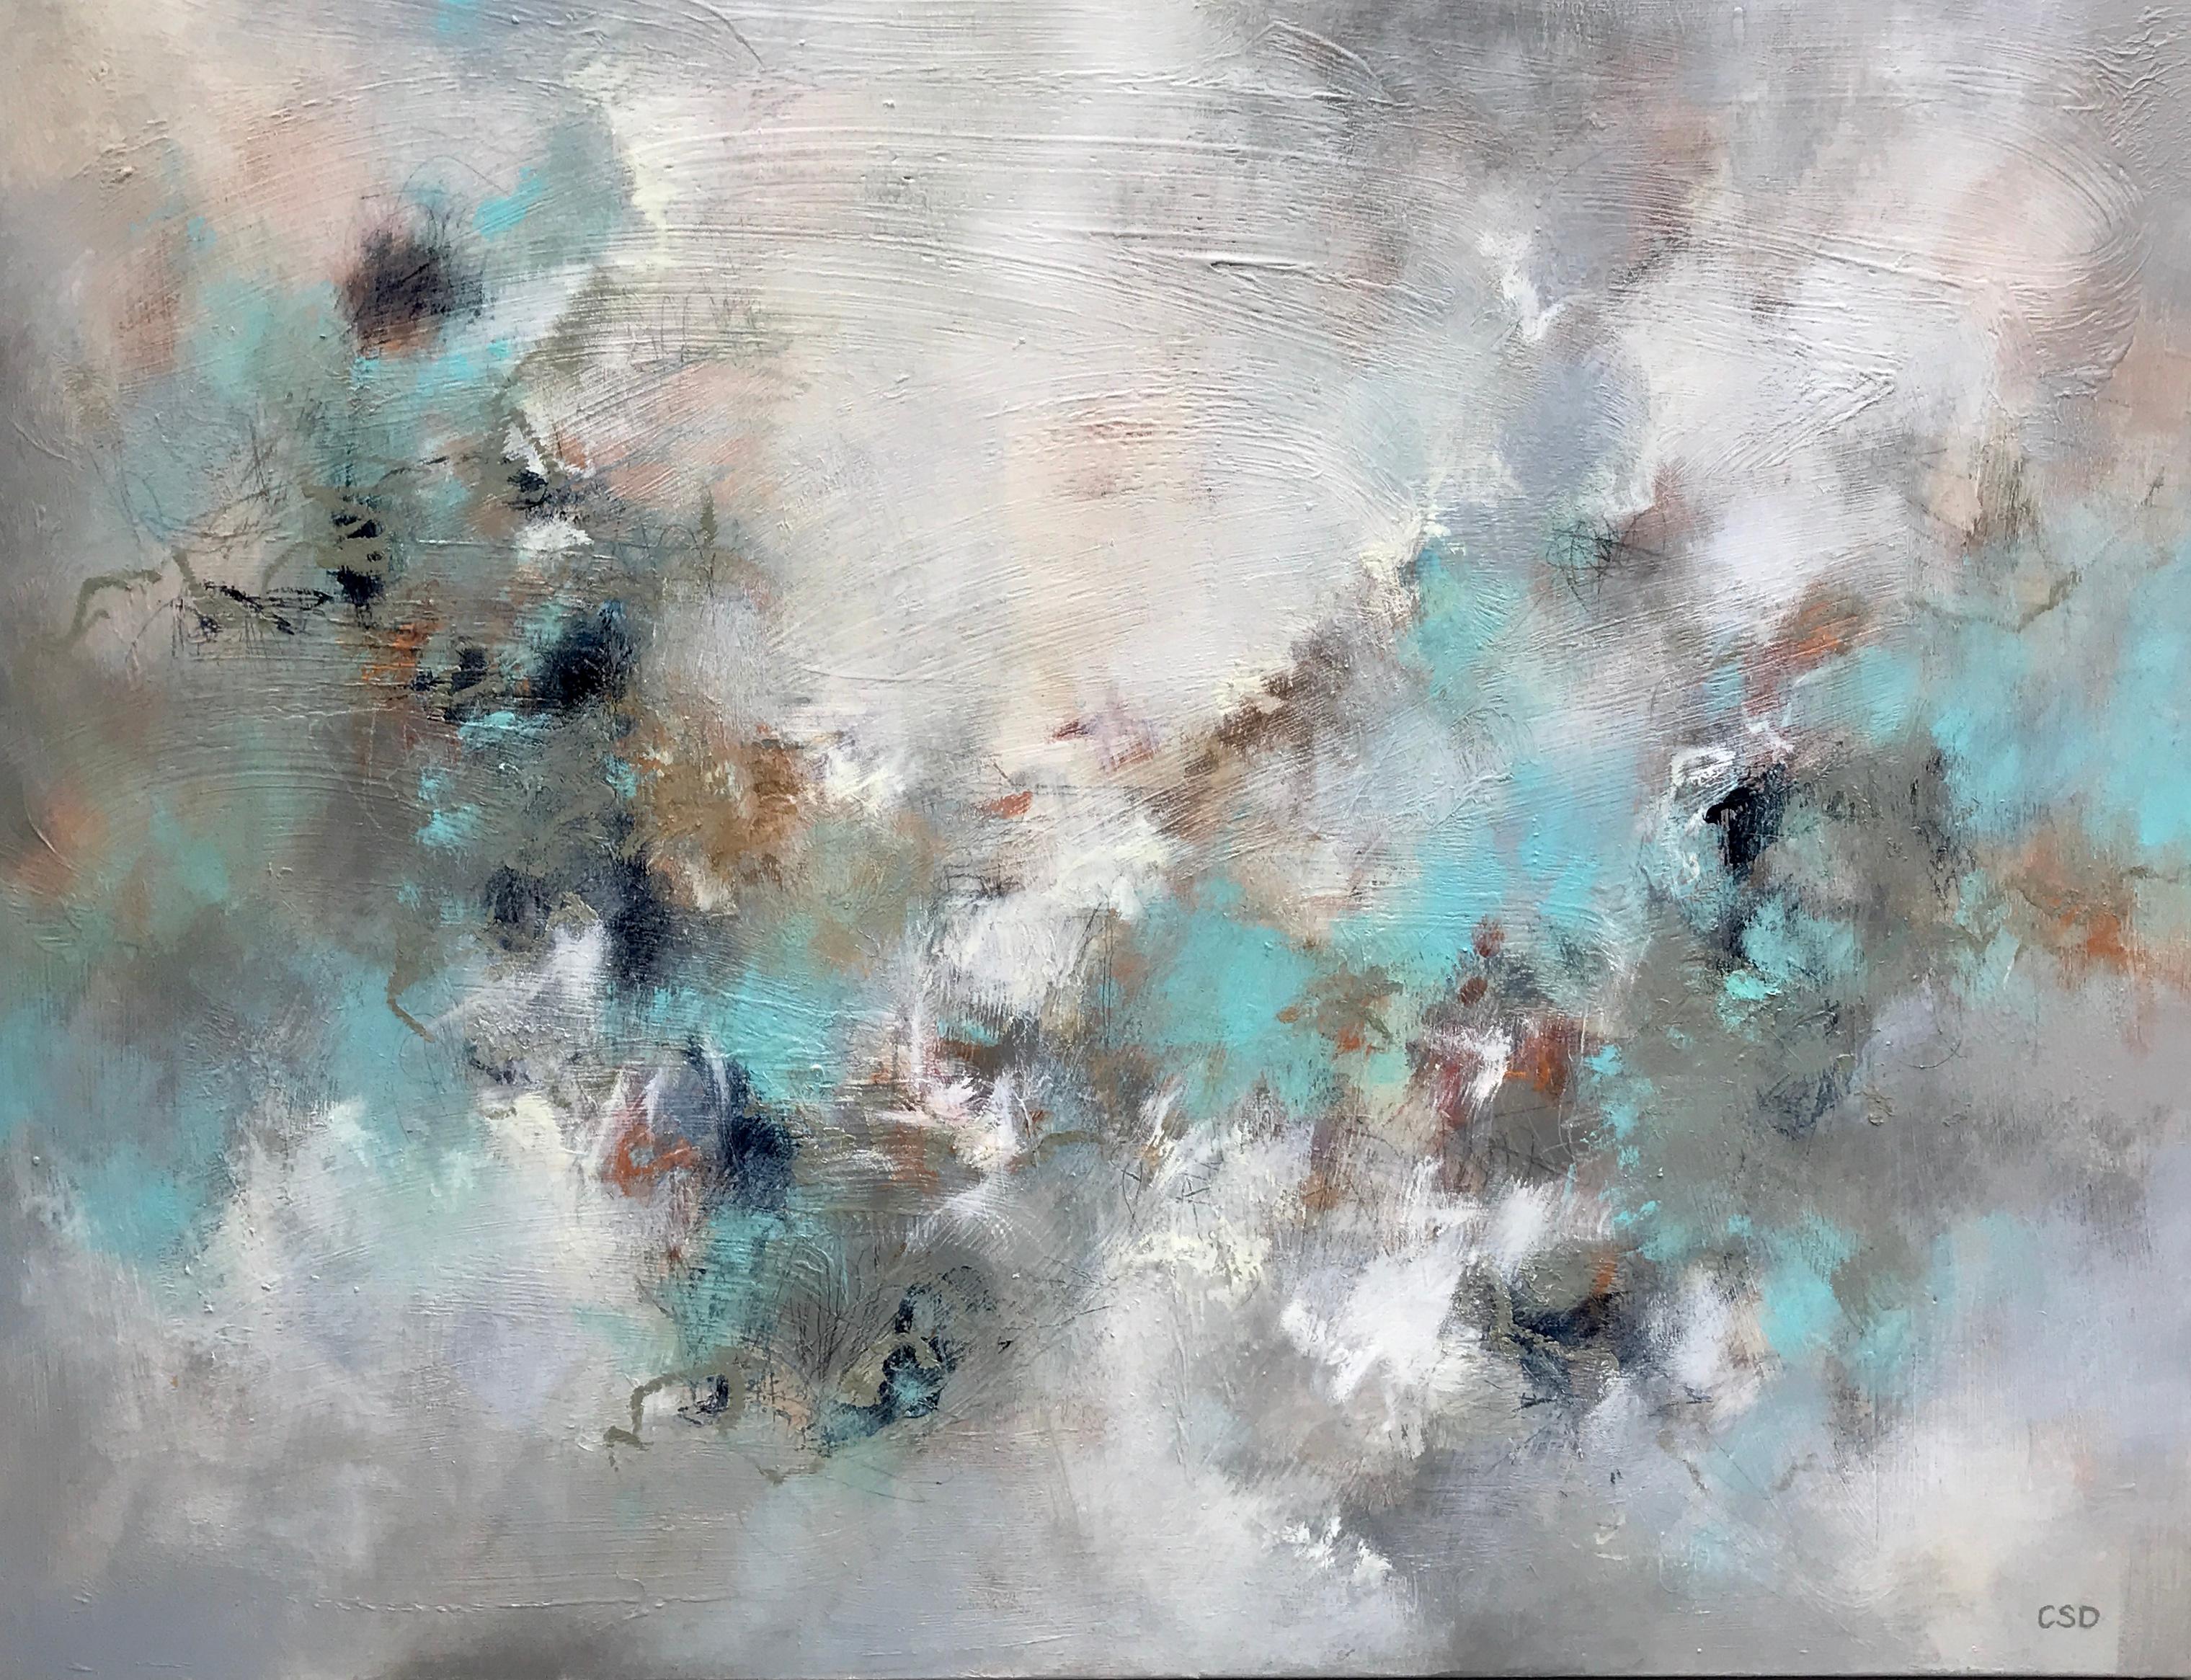 'Softly Into the Light' is a horizontal abstract mixed media on canvas painting created by American artist Christina Doelling in 2018. Featuring an exquisite palette mostly made of turquoise, white, black, grey and brown colors, this painting exudes